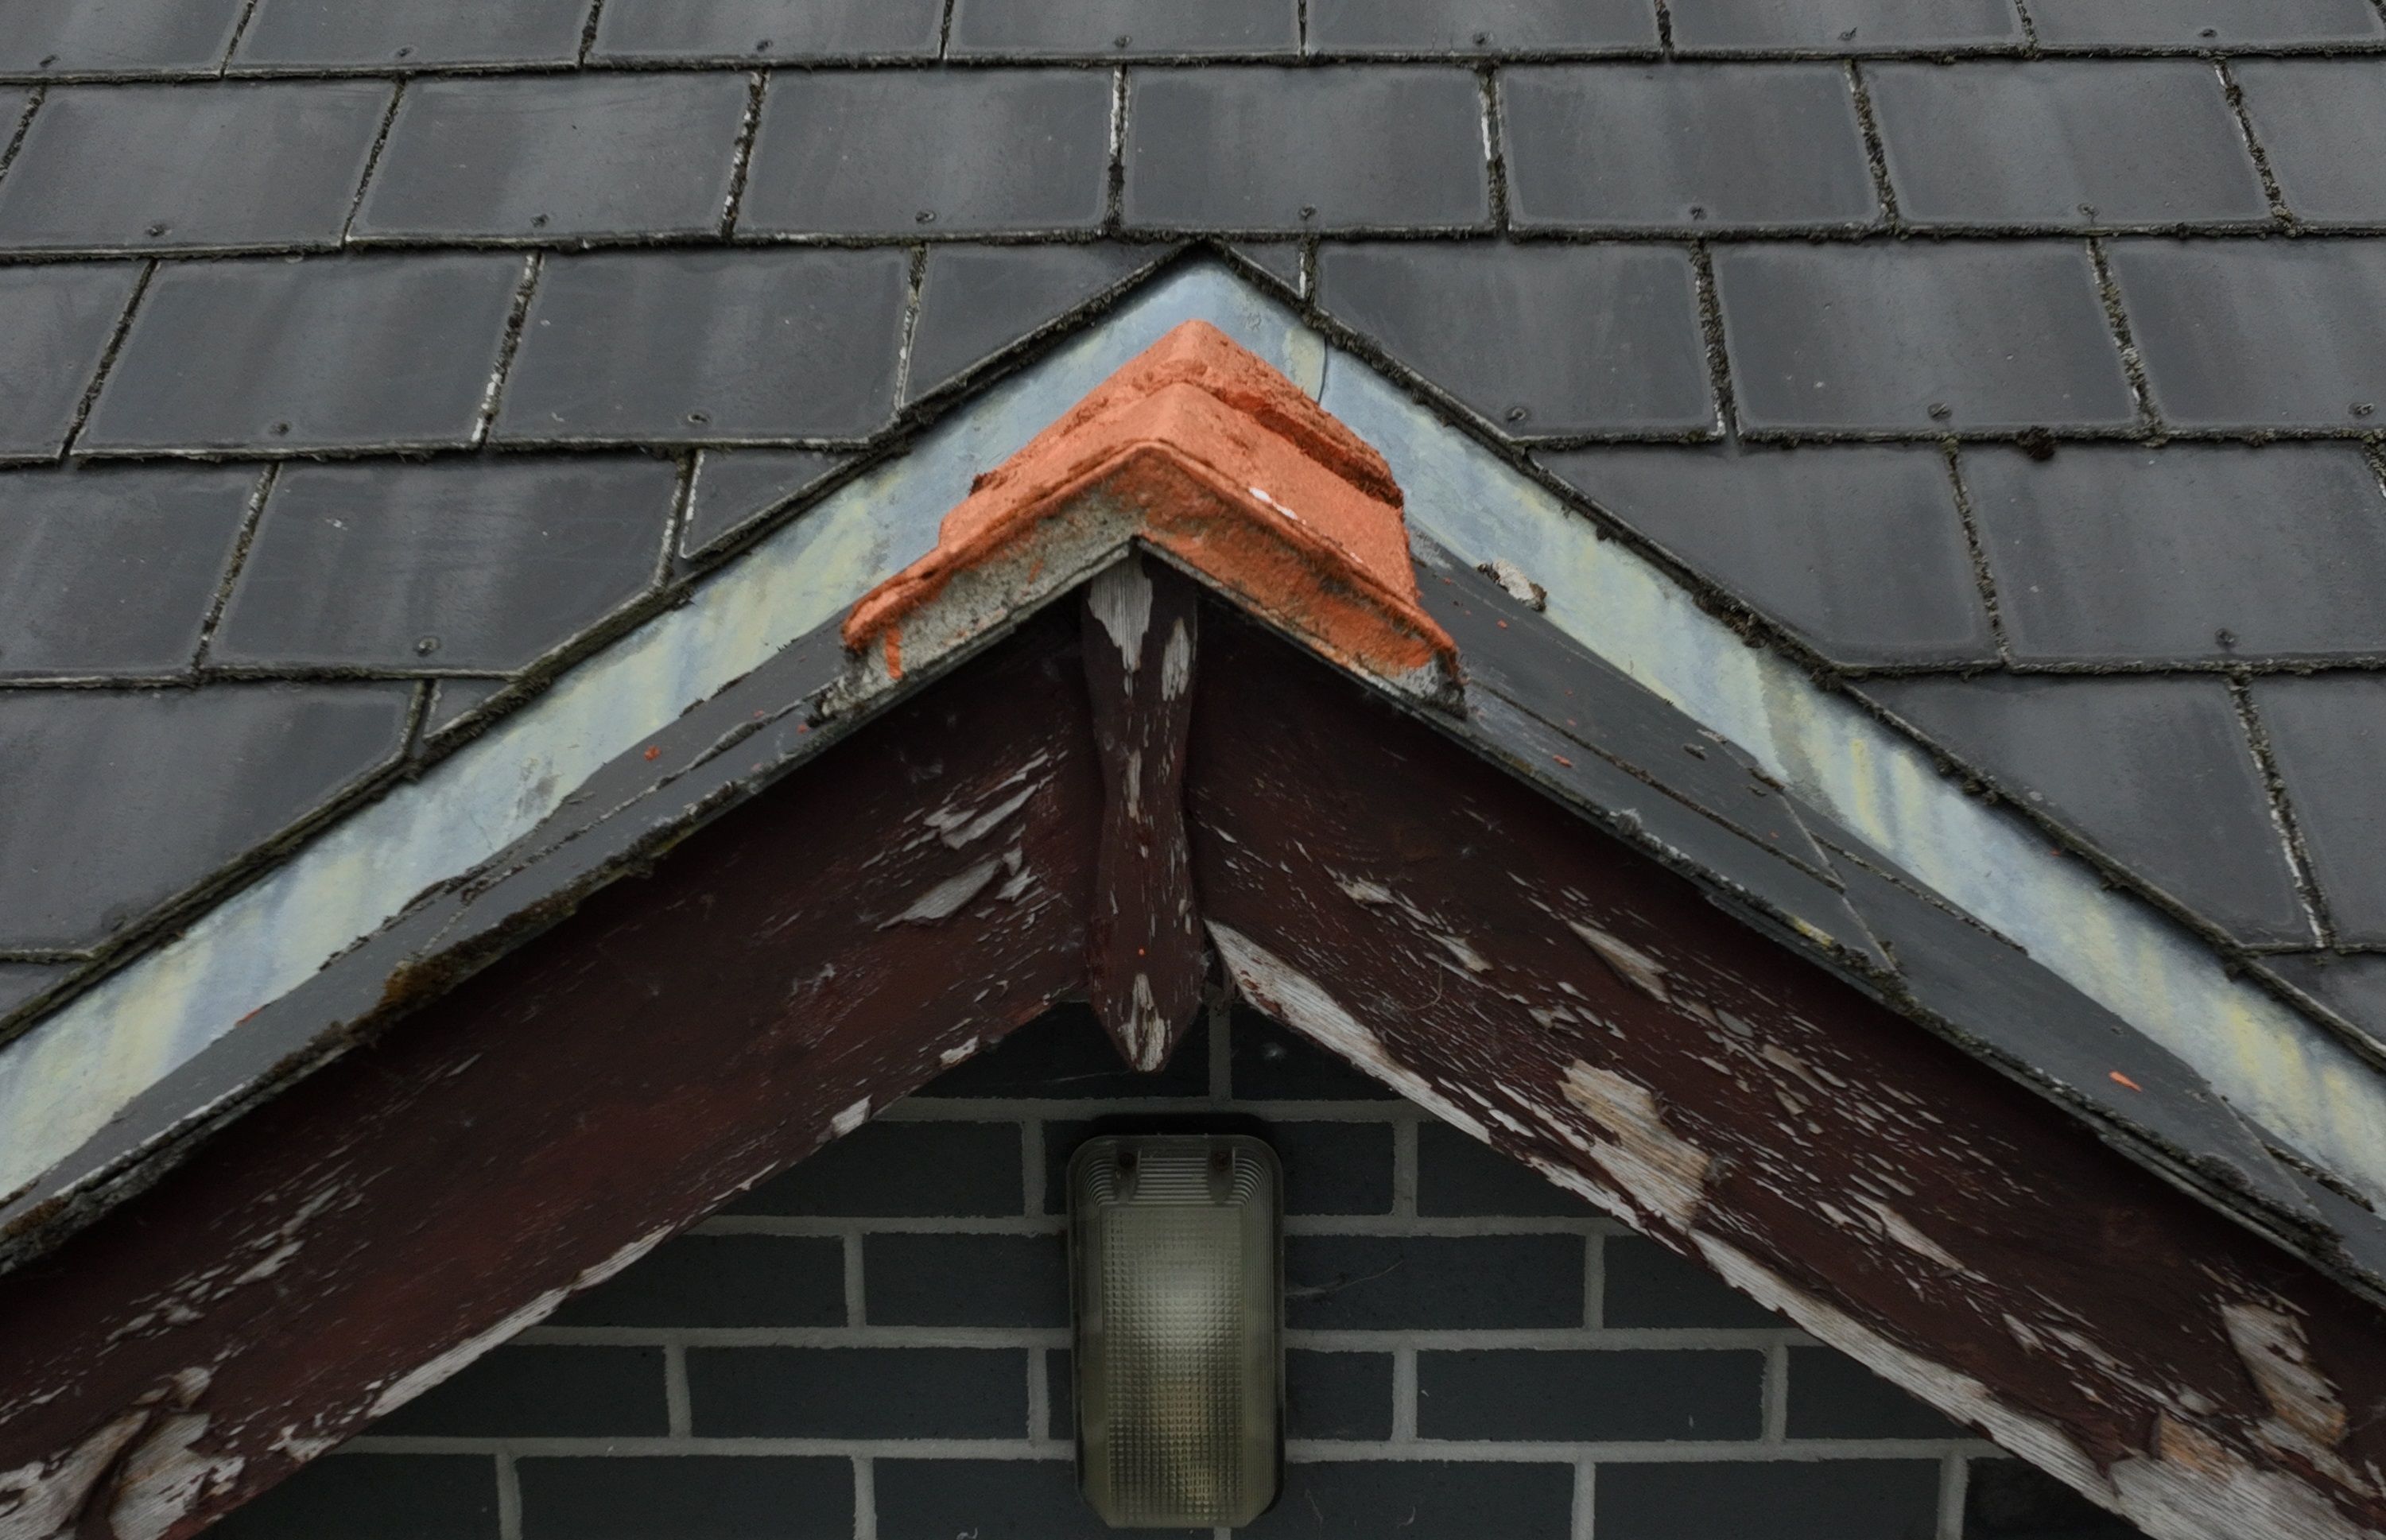 The old roof tiles which a Wales homeowner wanted replacing